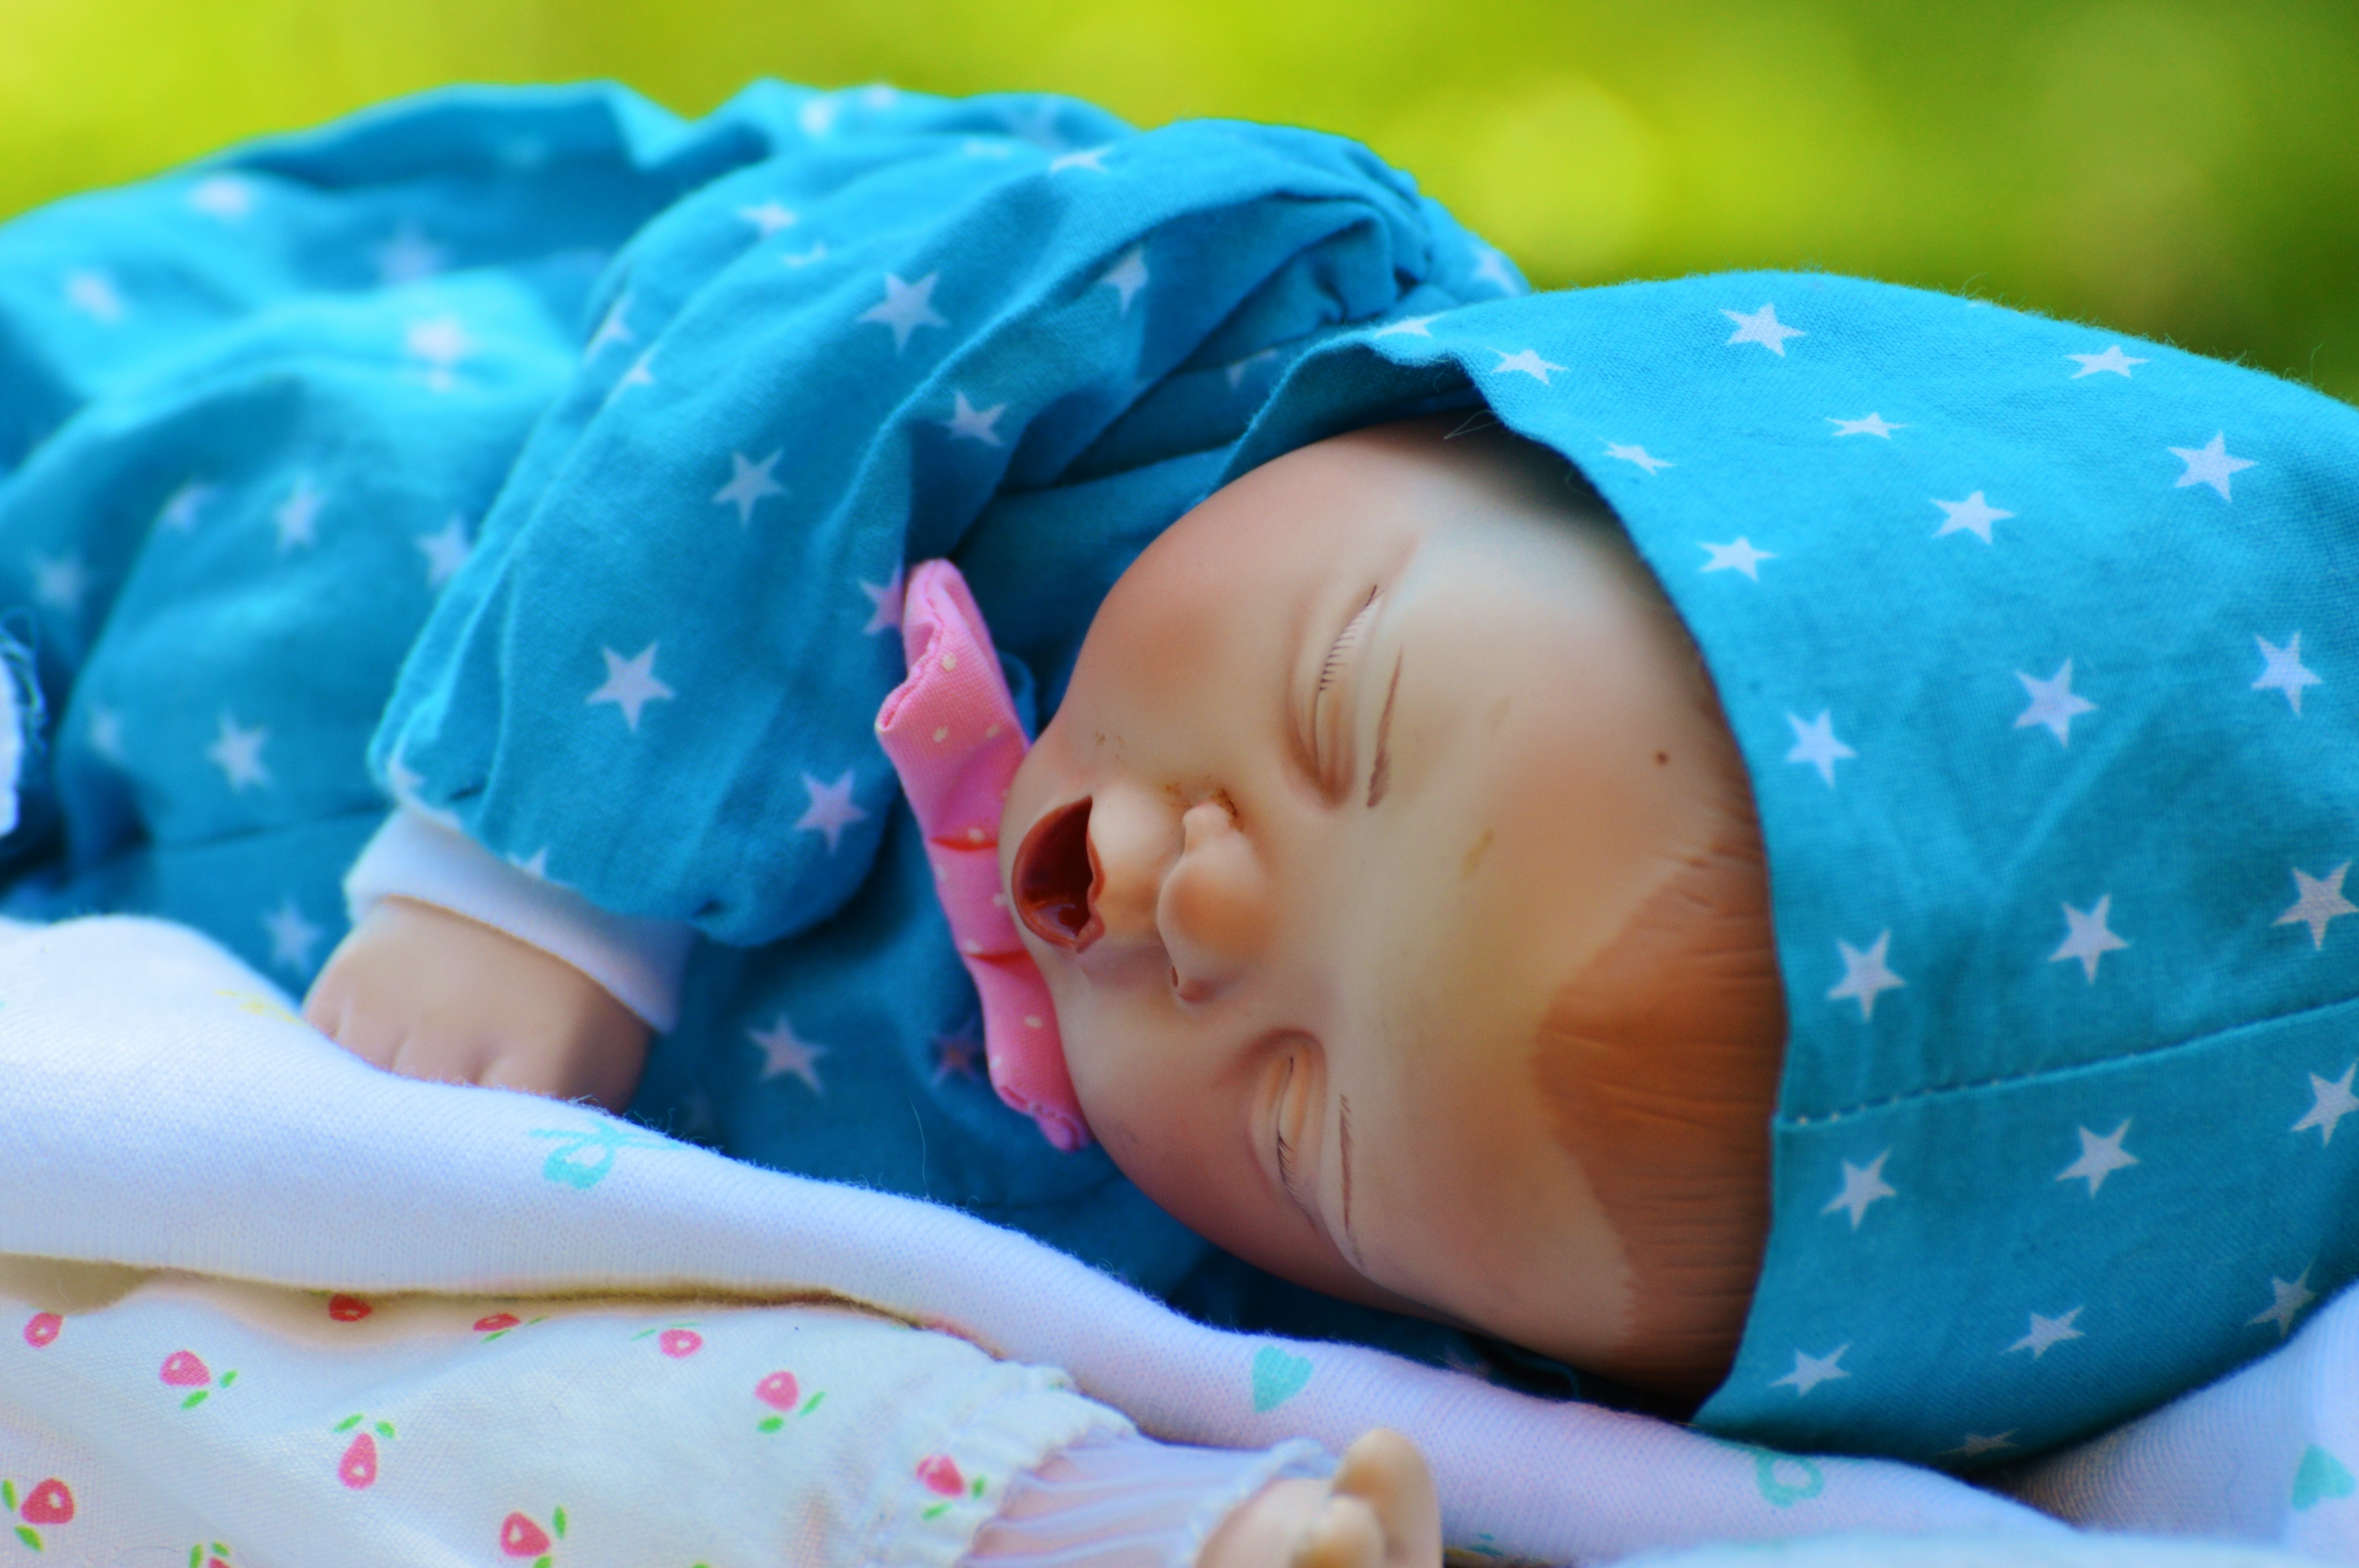 baby doll in teal and white star printed hooded sleeper